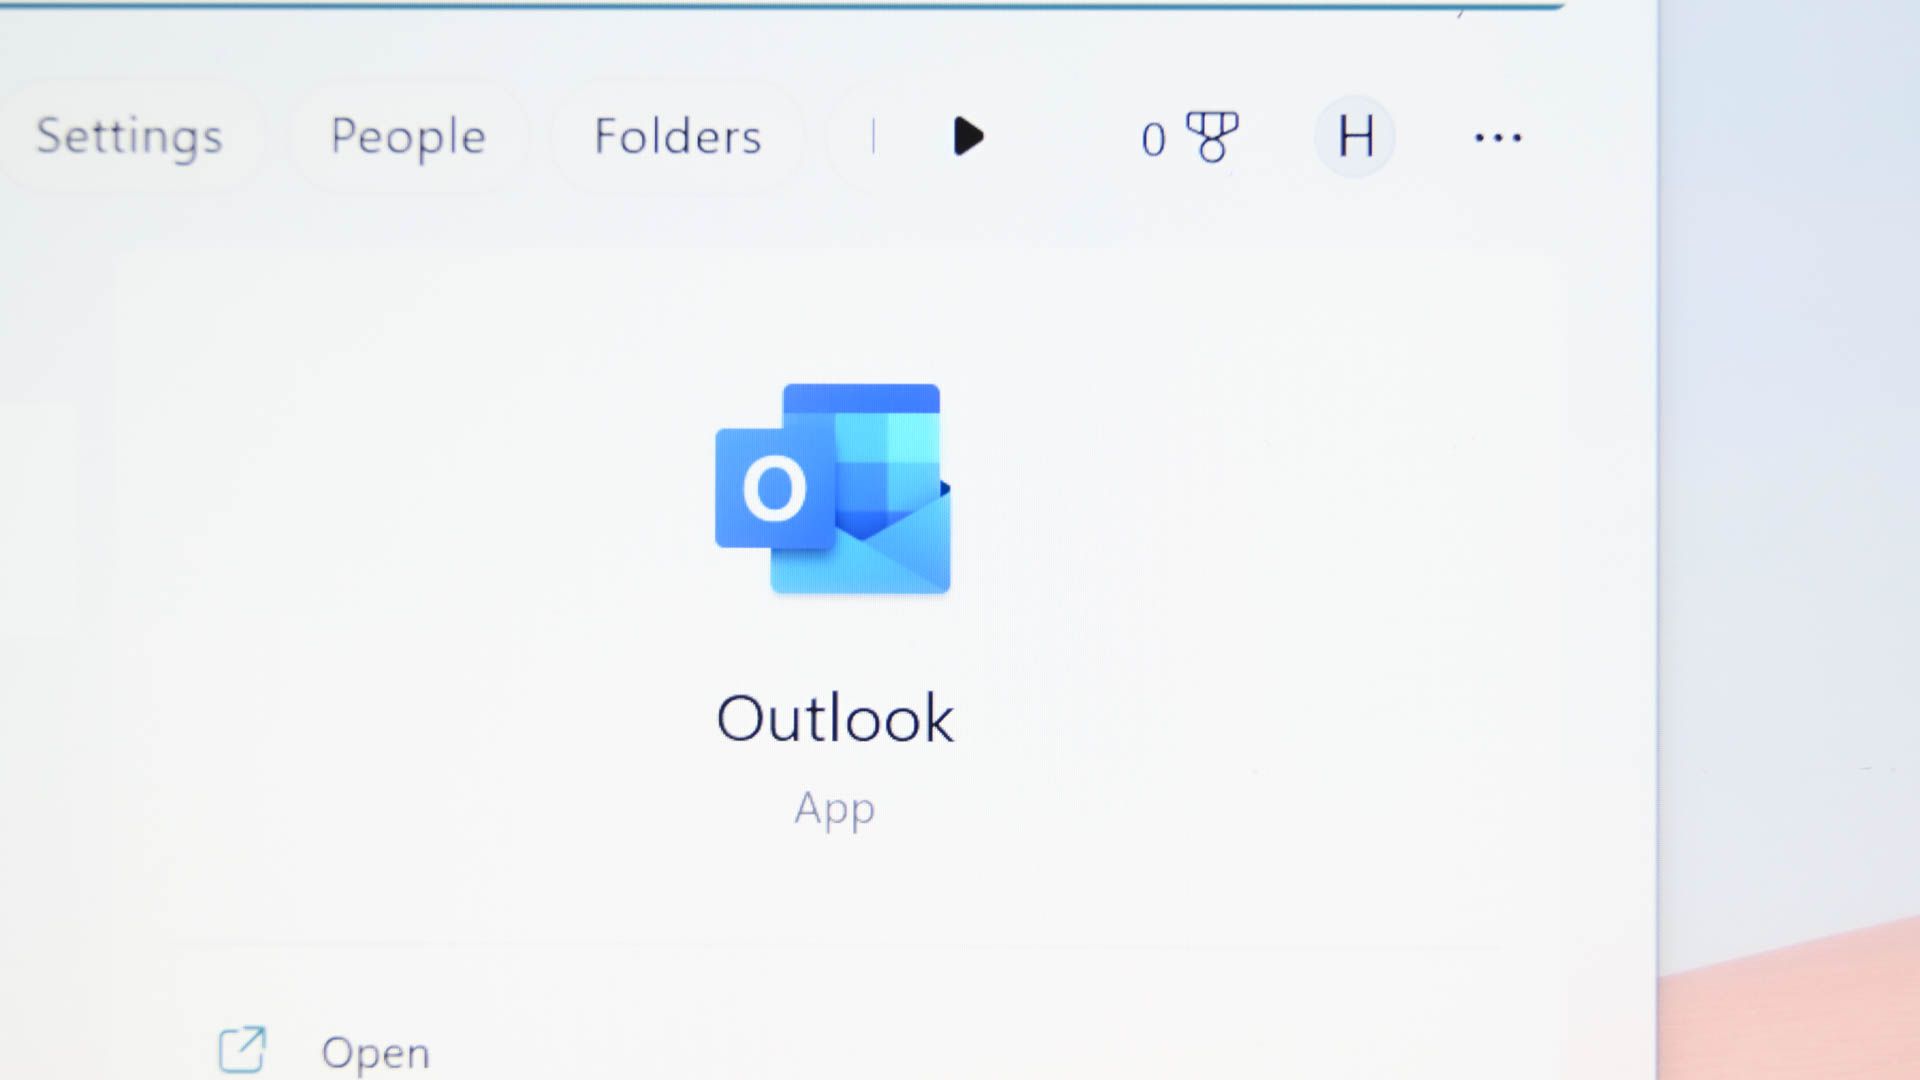 #How to Move Outlook’s Toolbar From the Side to the Bottom